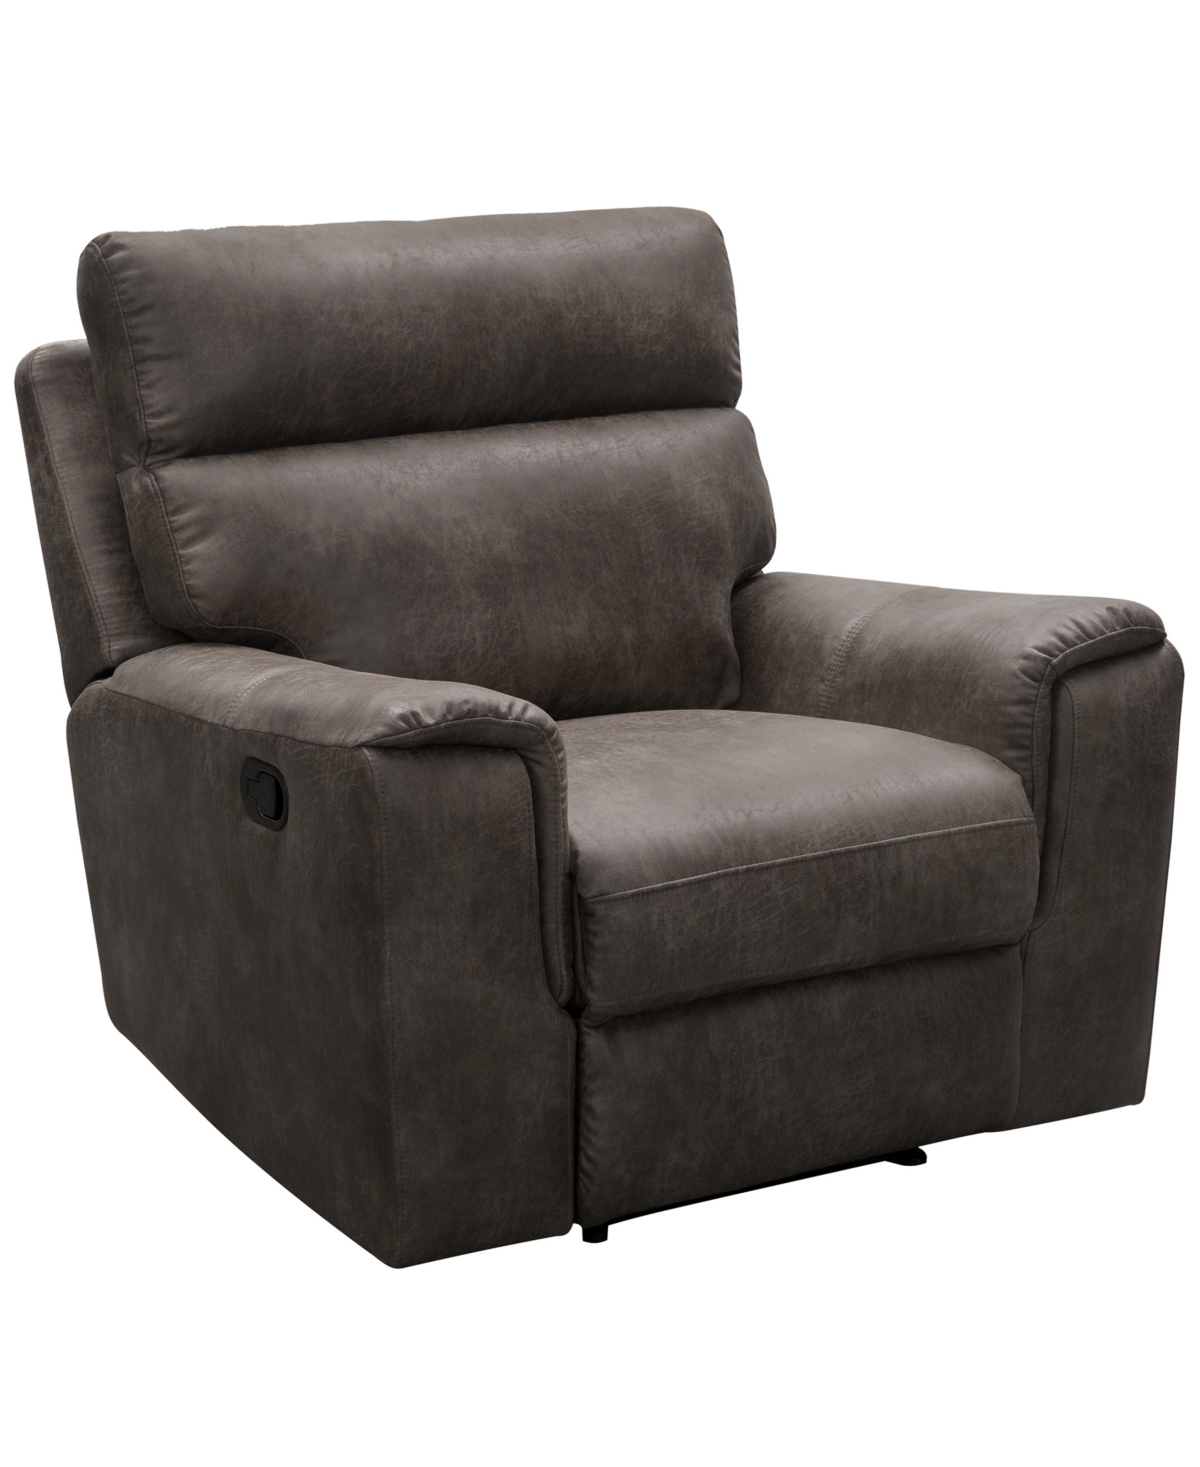 Abbyson Living Lawrence 38.5" Fabric Recliner In Dark Brown